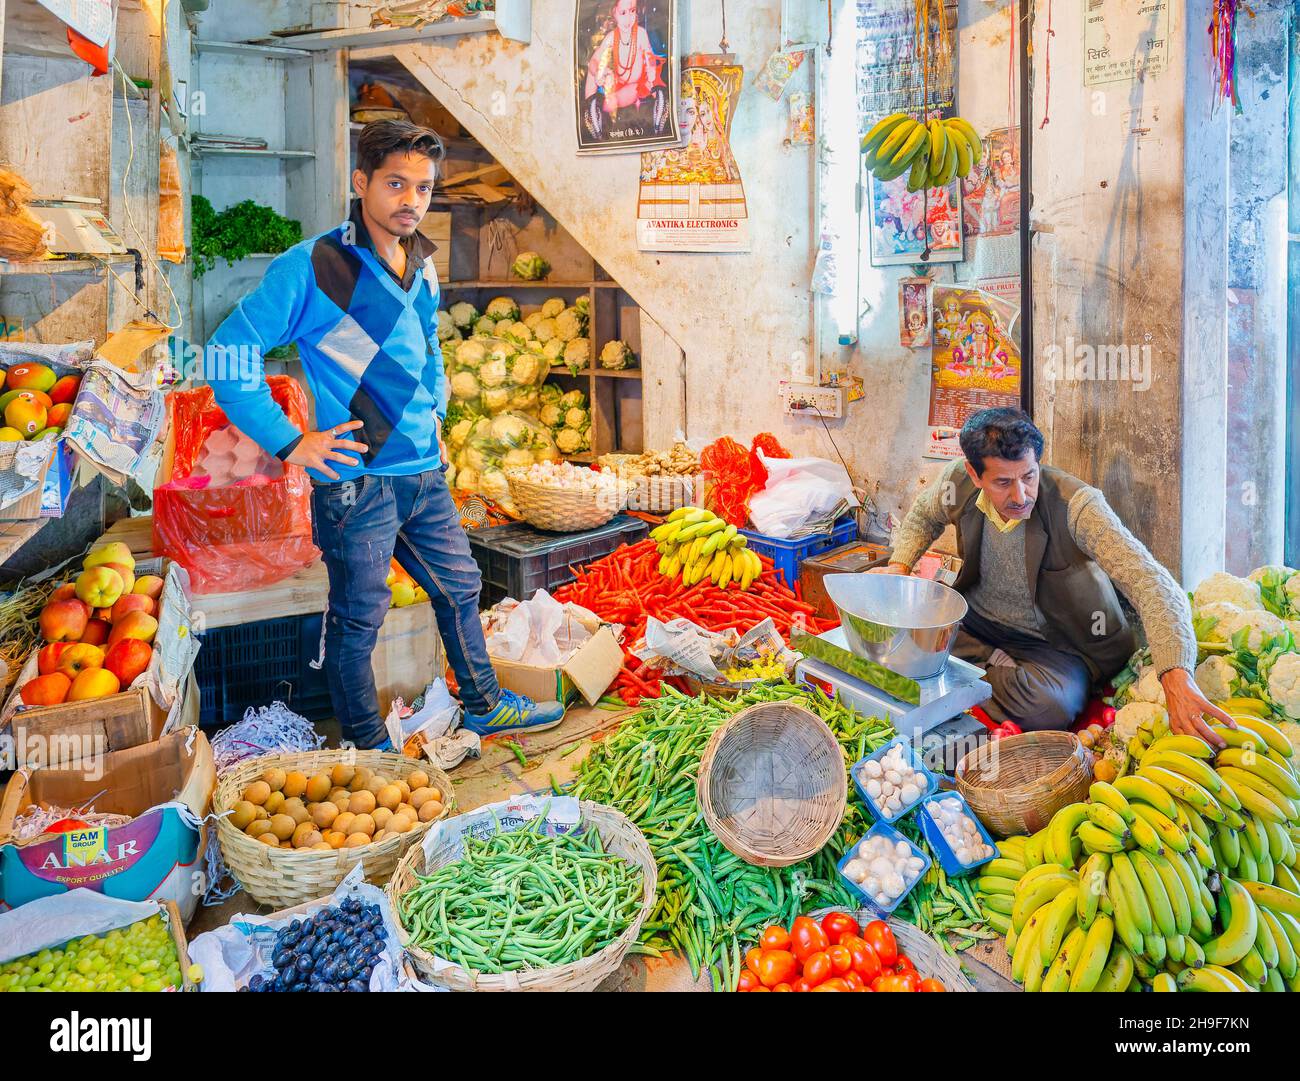 Shopkeepers tend a roadside fruit and vegetable shop in Pragpur, a heritage village in Kagra district, Himachal Pradesh, India Stock Photo